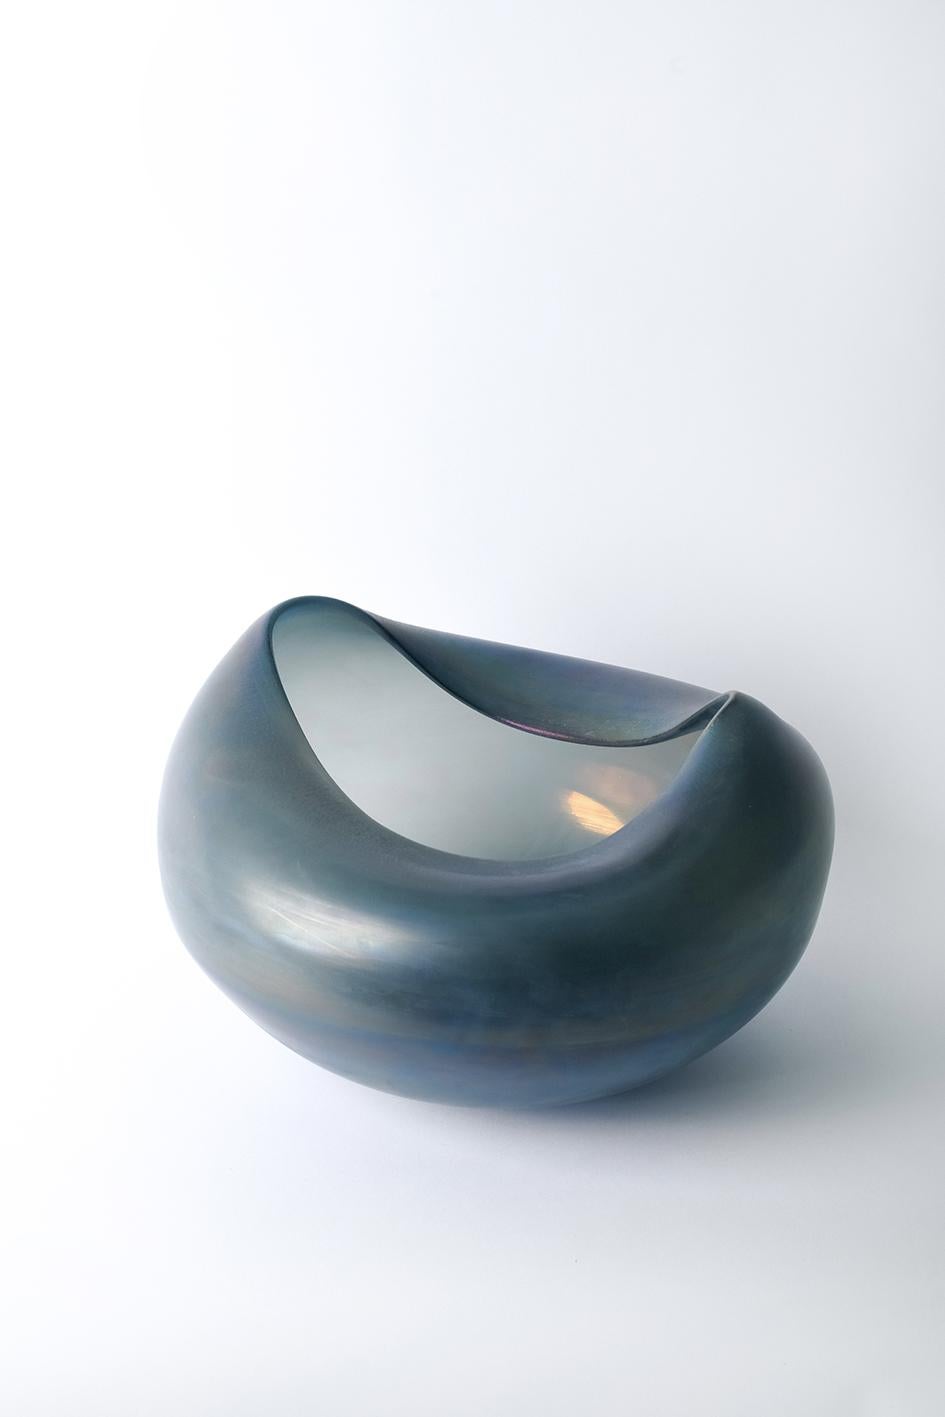 Ghebo vase by Purho
Dimensions: D38 x W 34 x H24 cm
Materials: Murano glass
Available in other colors.

Ghebo is a bowl from the Laguna Collection designed by Ludovica+Roberto Palomba for Purho in spring 2022.
Large volumes and wavy profiles